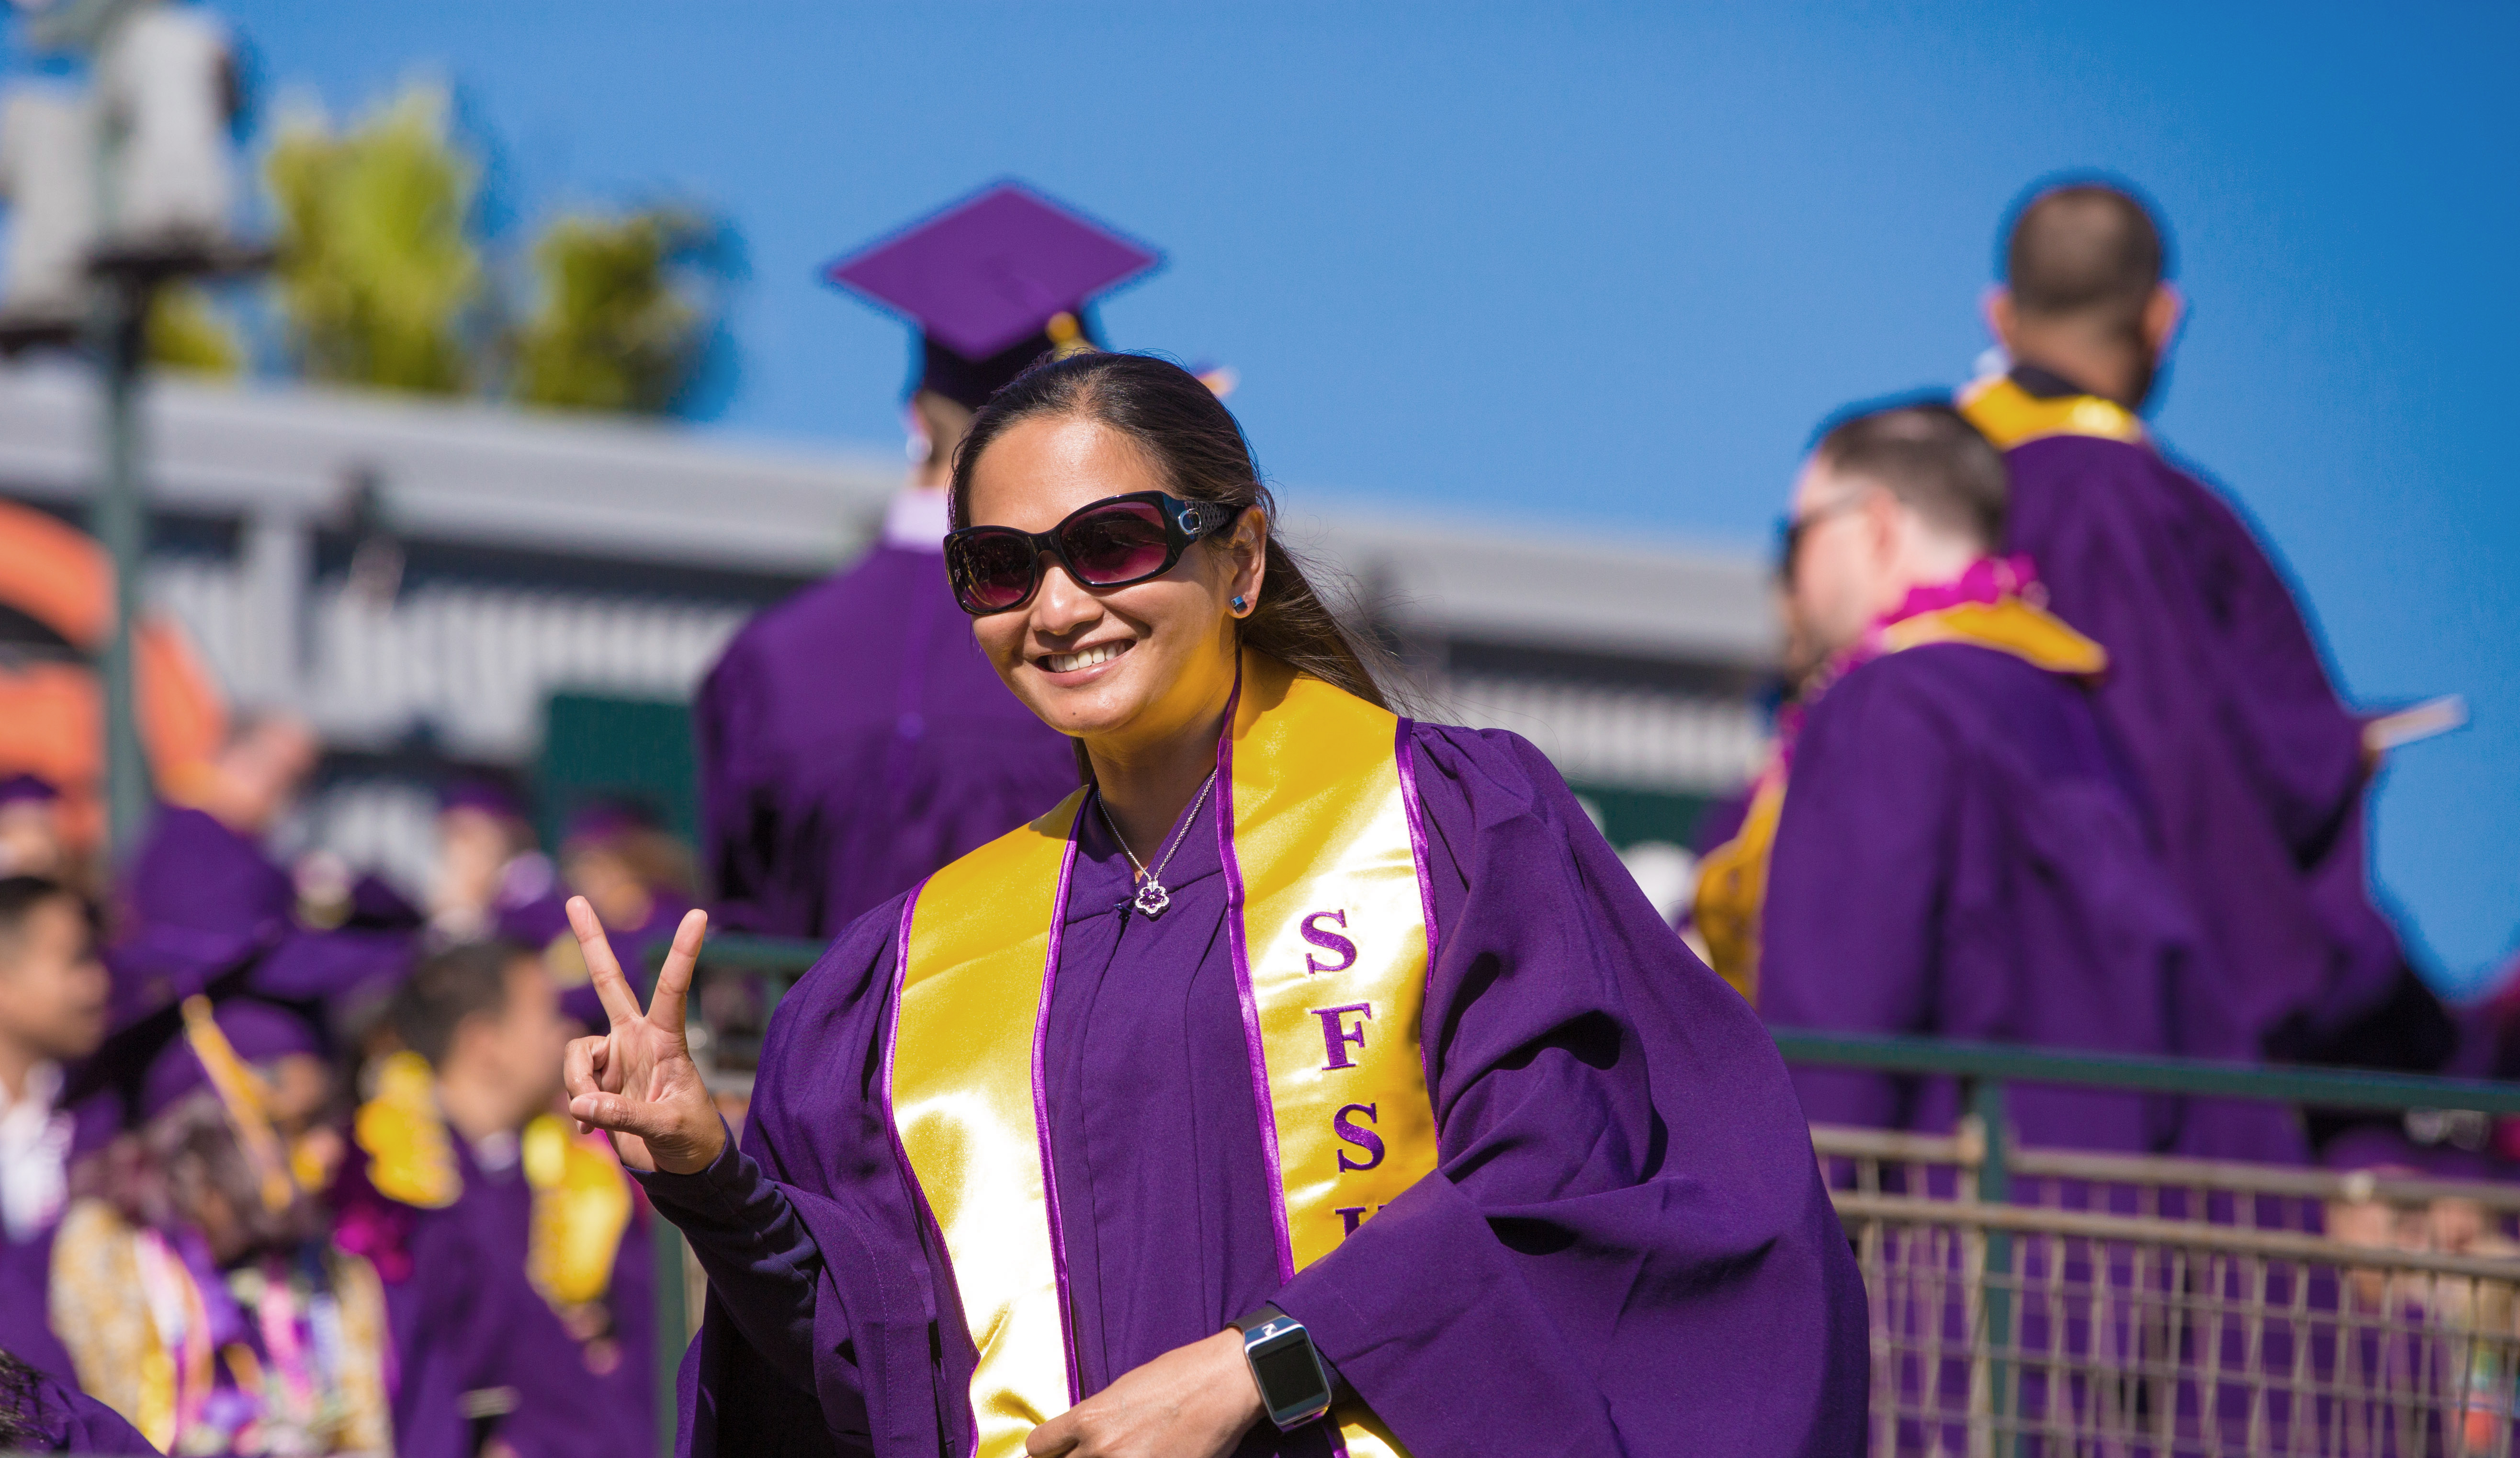 Female wearing sunglasses at graduation in purple gown showing a peace sign